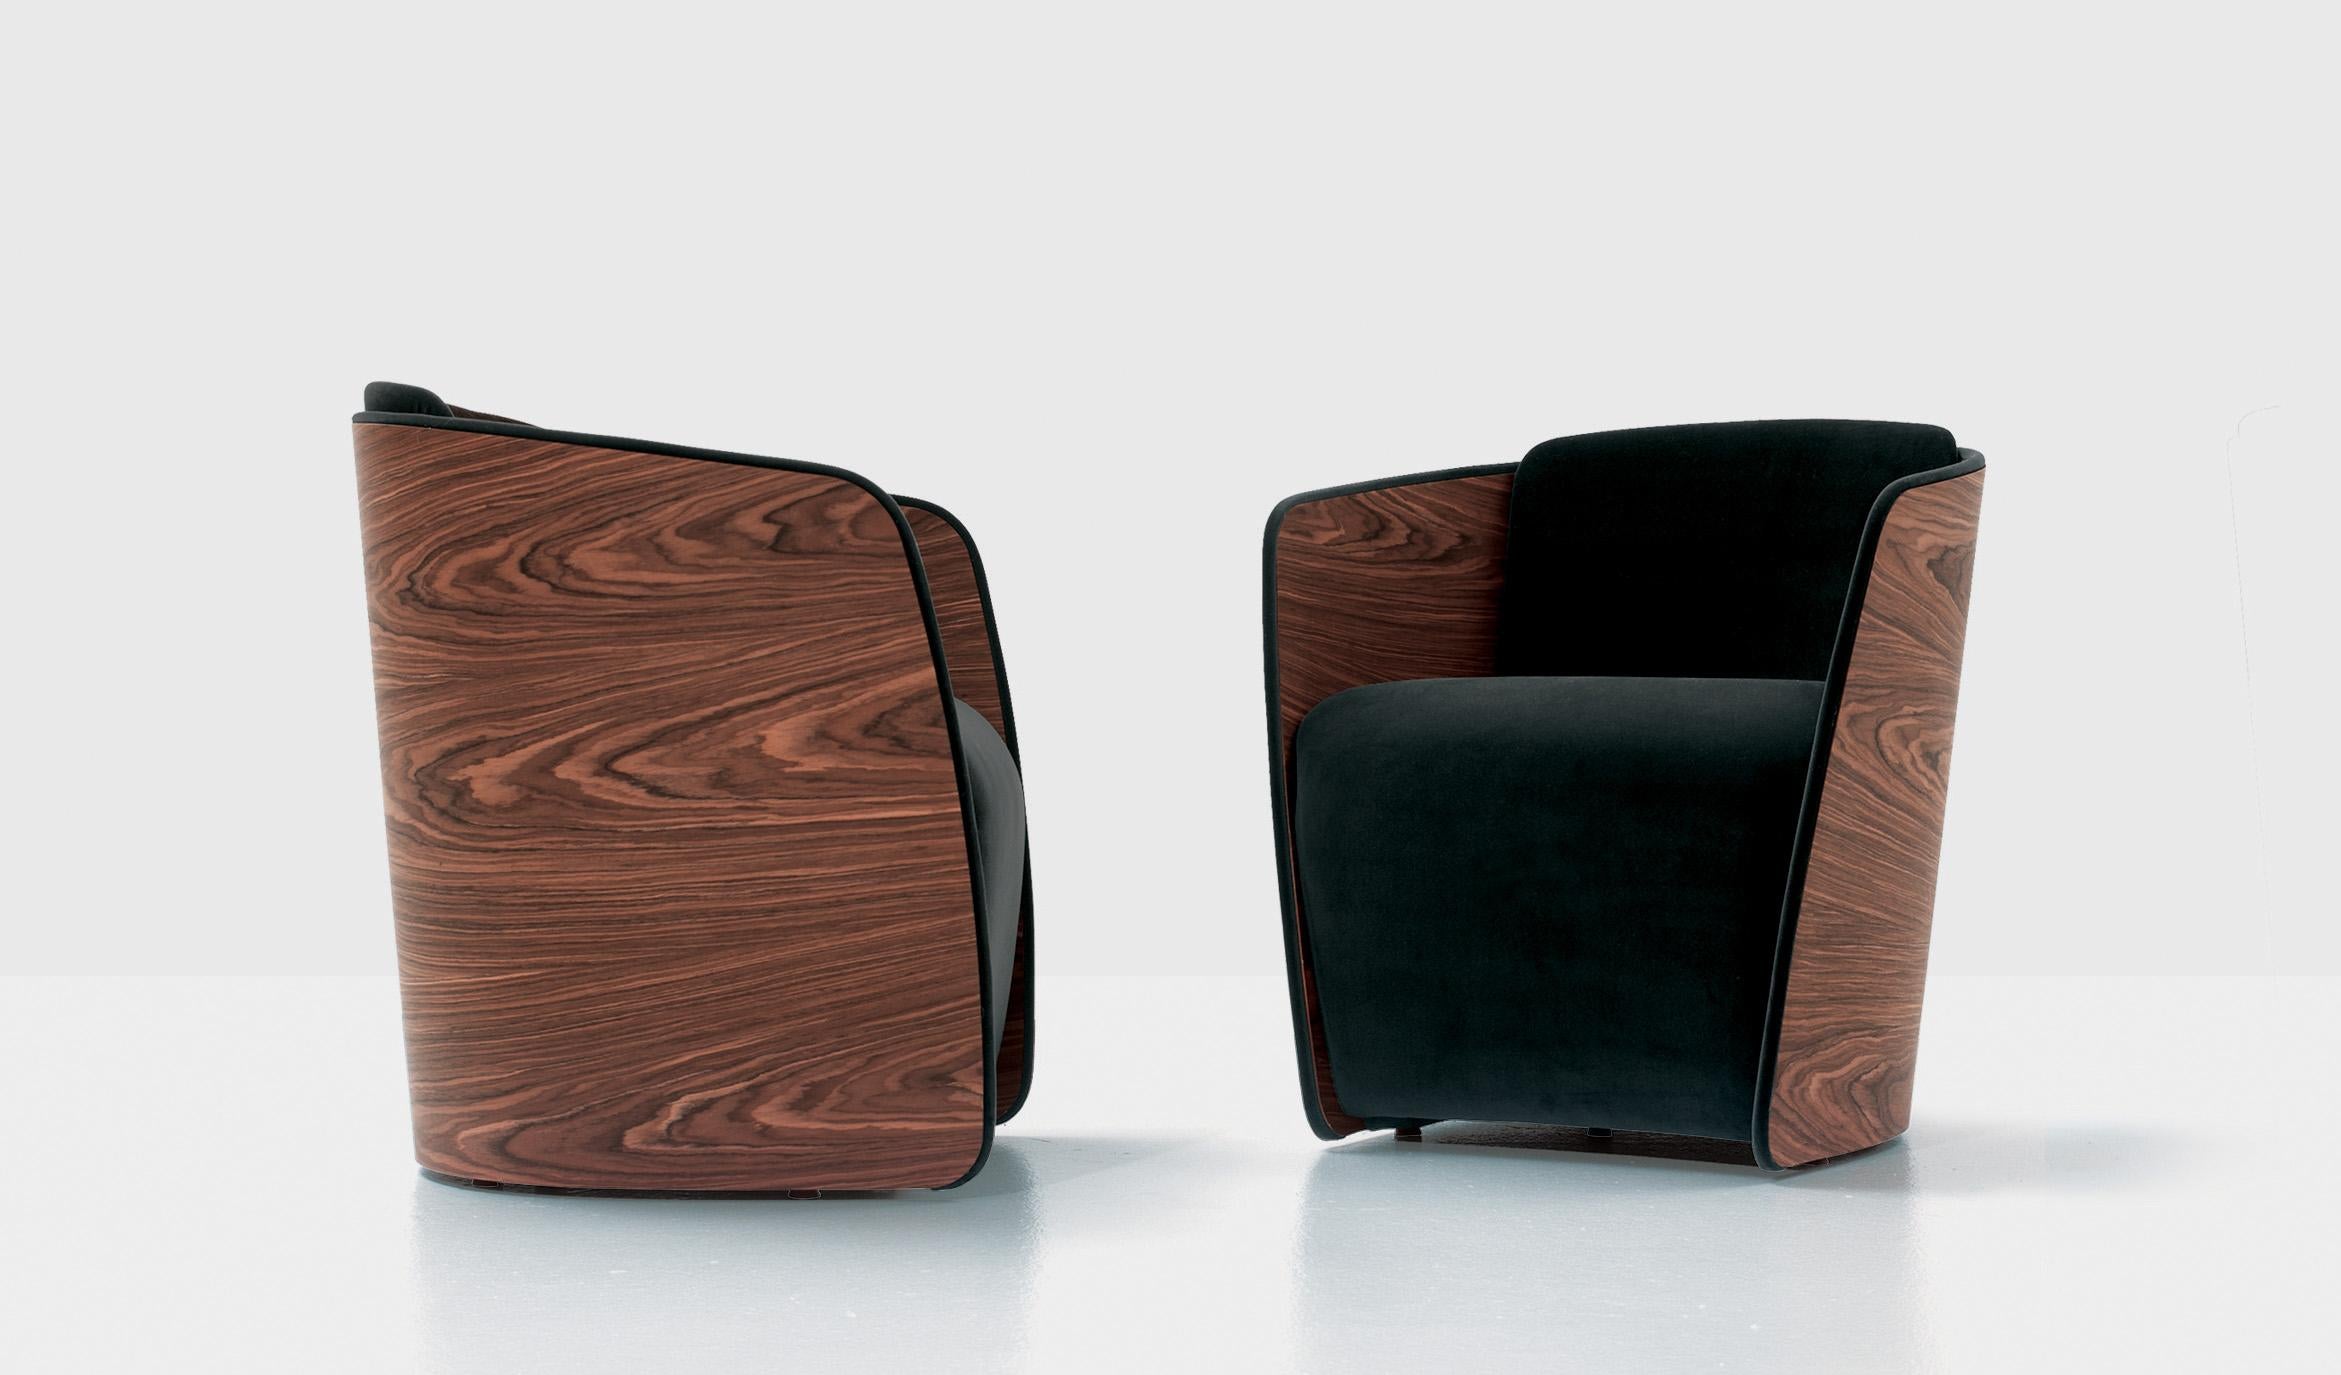 Multi-layered, curved, wood frame available in veneered rosewood or mat lacquered. New finishing 2010 outer covering in stainless steel. Padding in shape retaining polyurethane with a density of 30. Upholstery covering in either capitonnè or